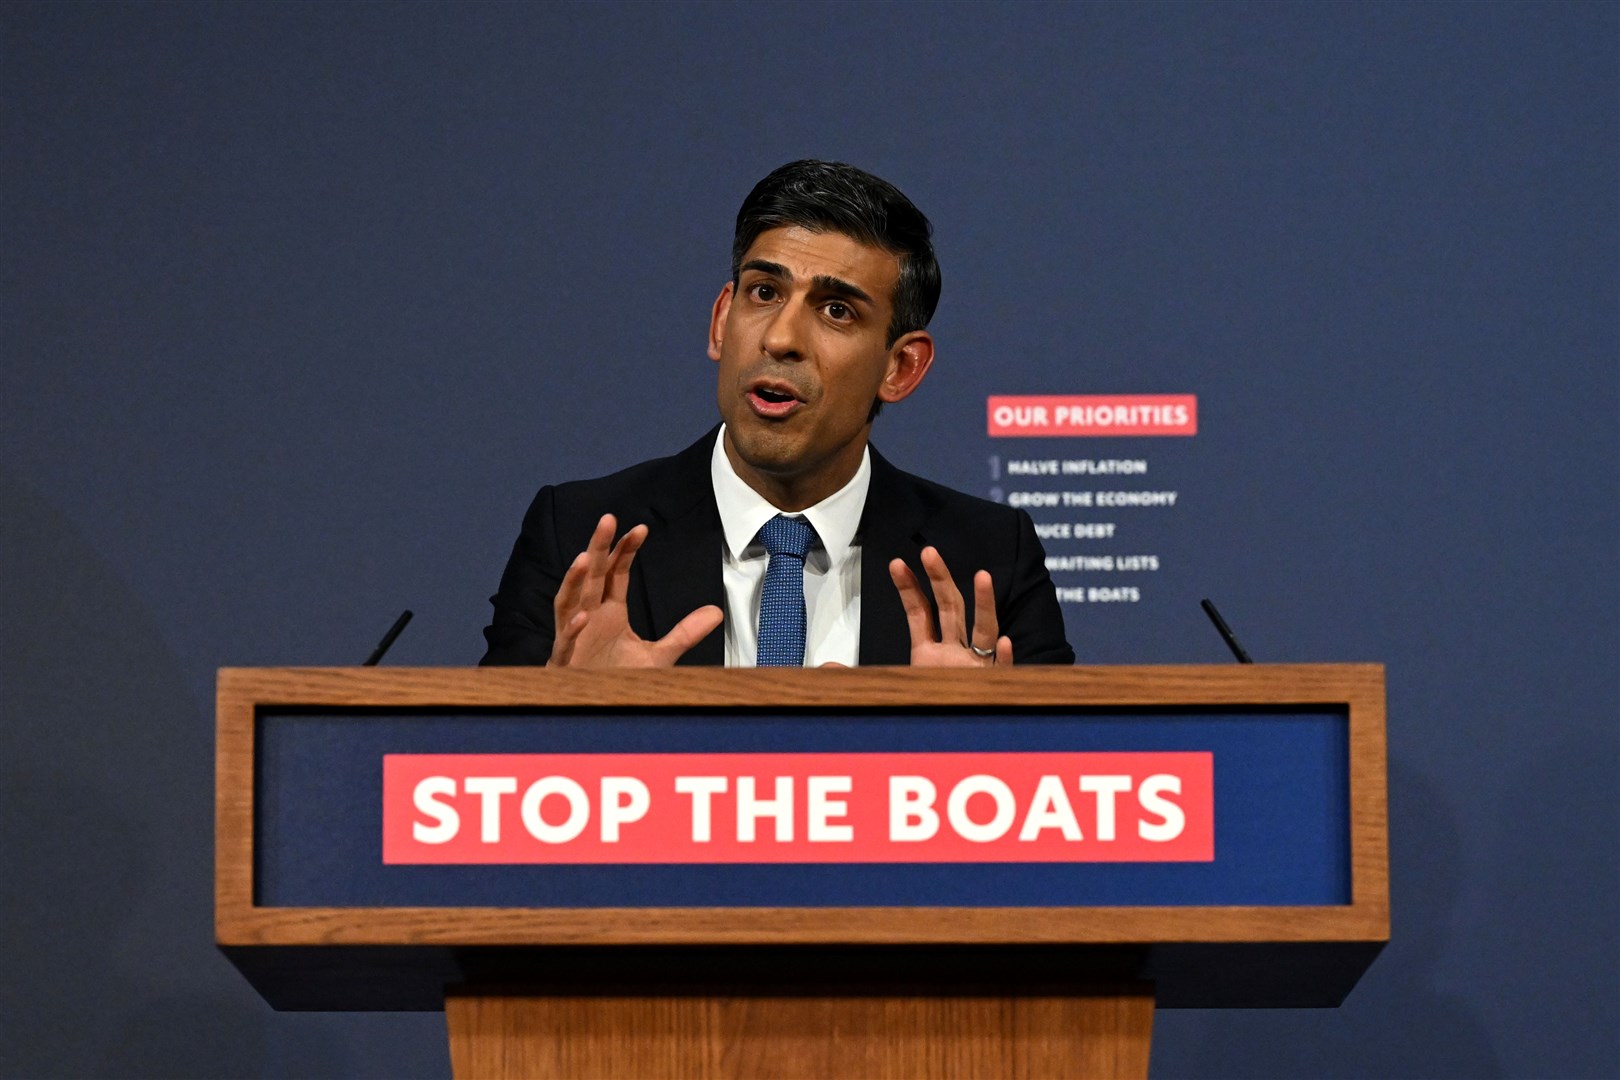 Prime Minister Rishi Sunak said tackling Channel crossings is one of his priorities (PA)